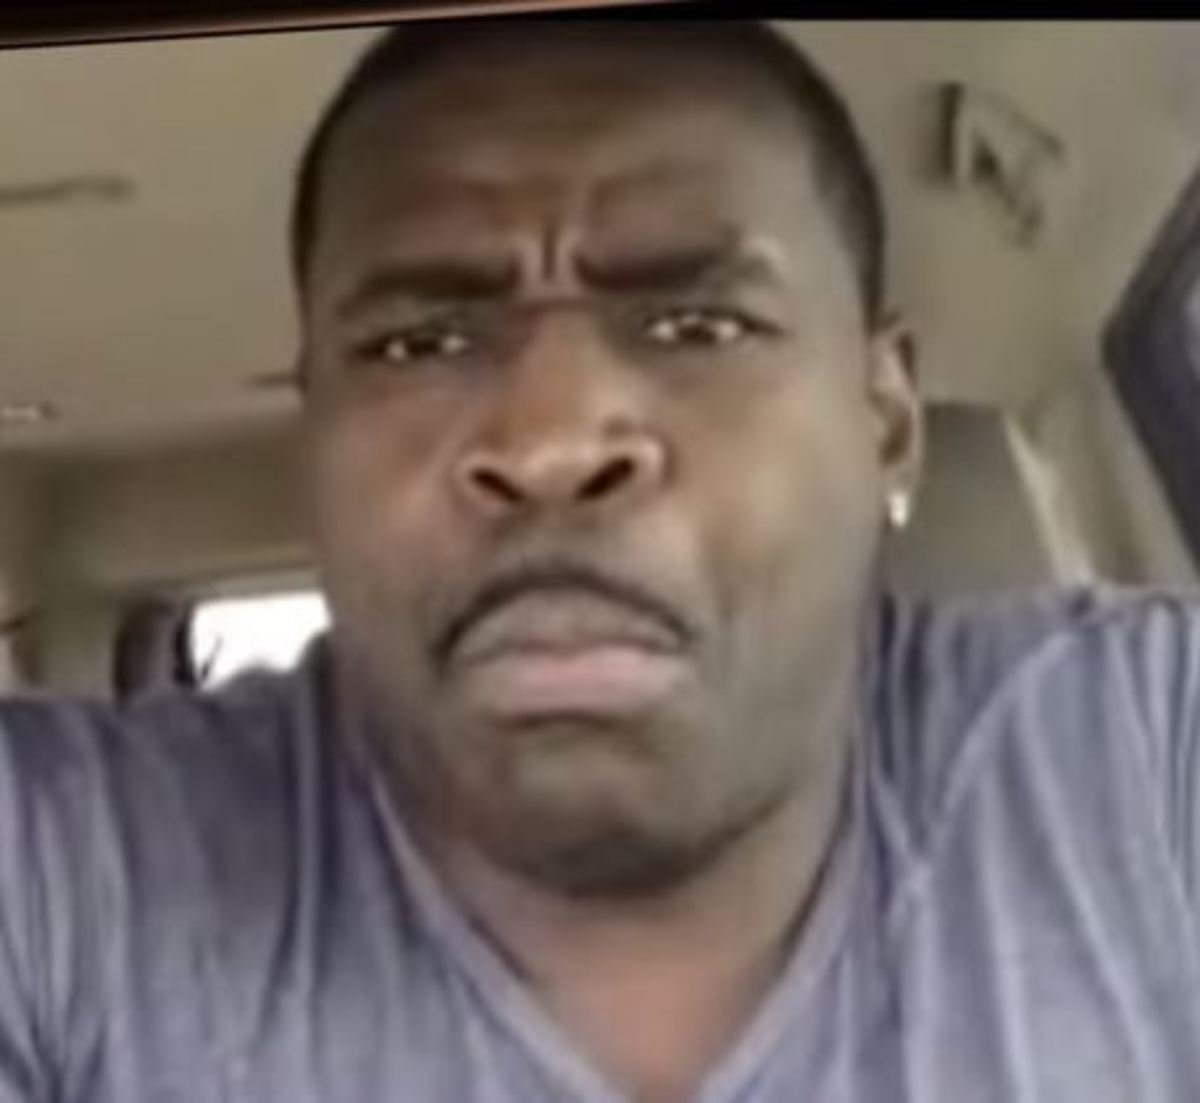 Michael Irvin making a face during a TMZ interview.